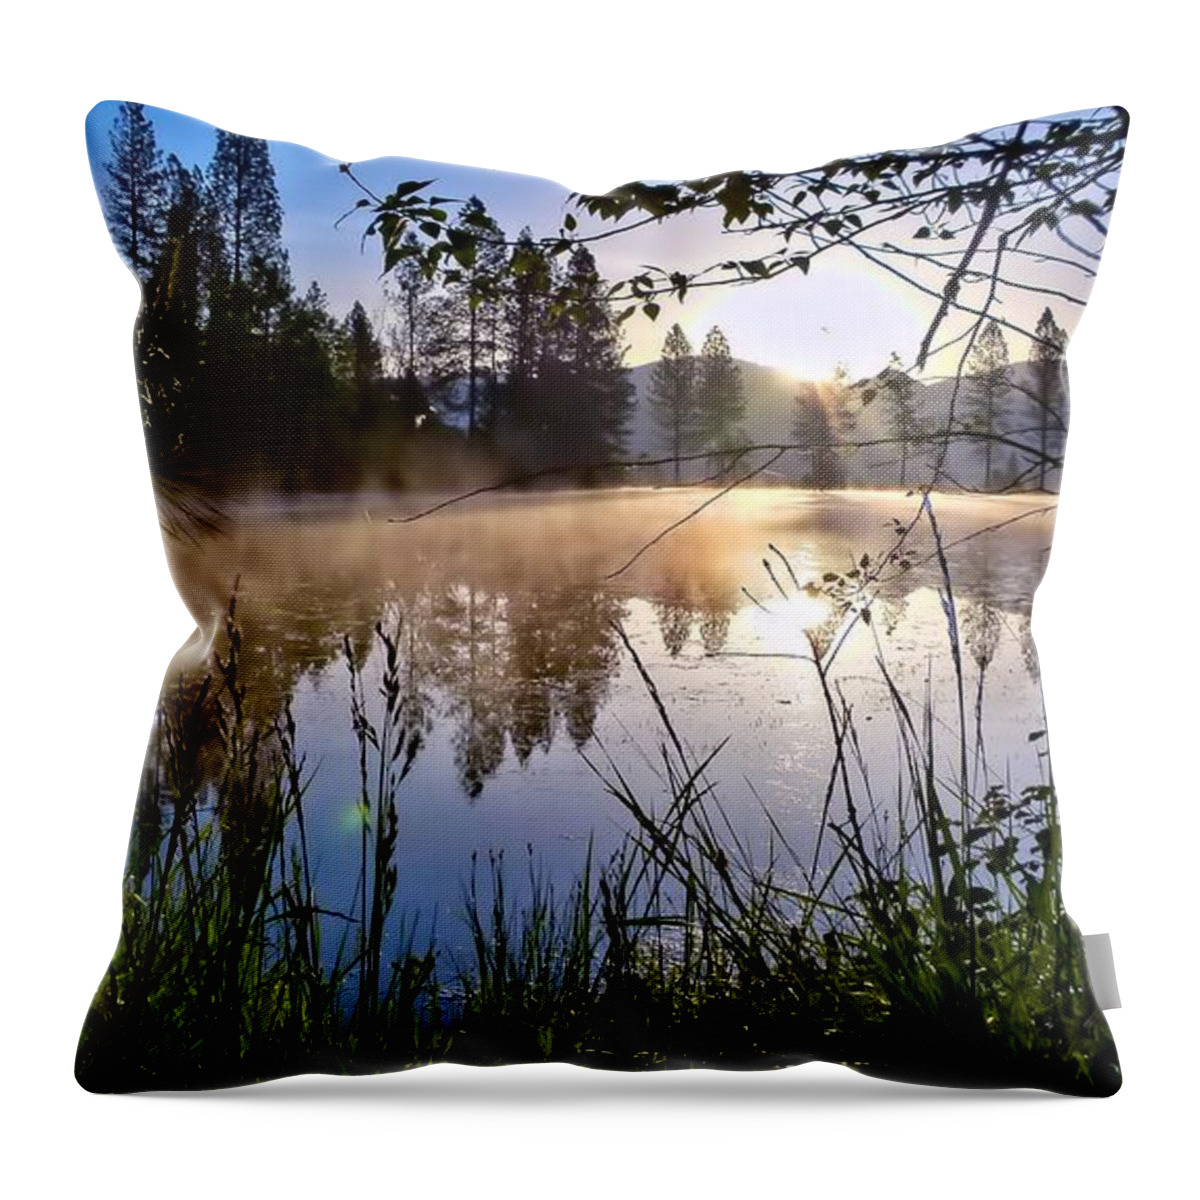 Landscape Throw Pillow featuring the photograph Sunrise Over Heron Pond by Julia Hassett